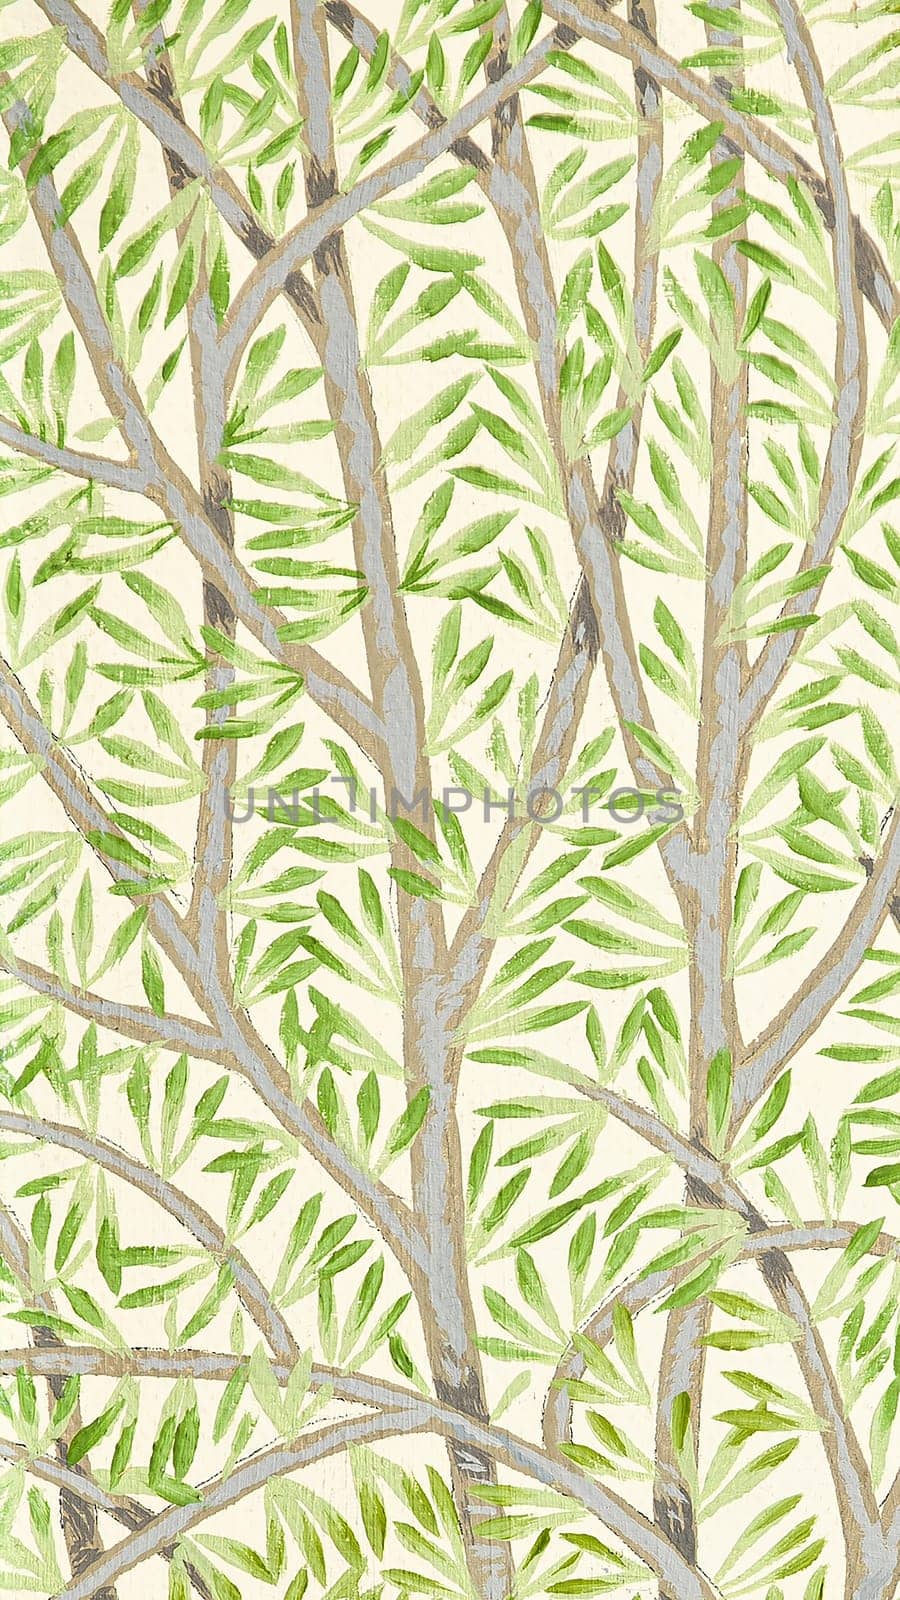 A vertical illustrated design of tree branches with green leaves on a beige background by A_Karim